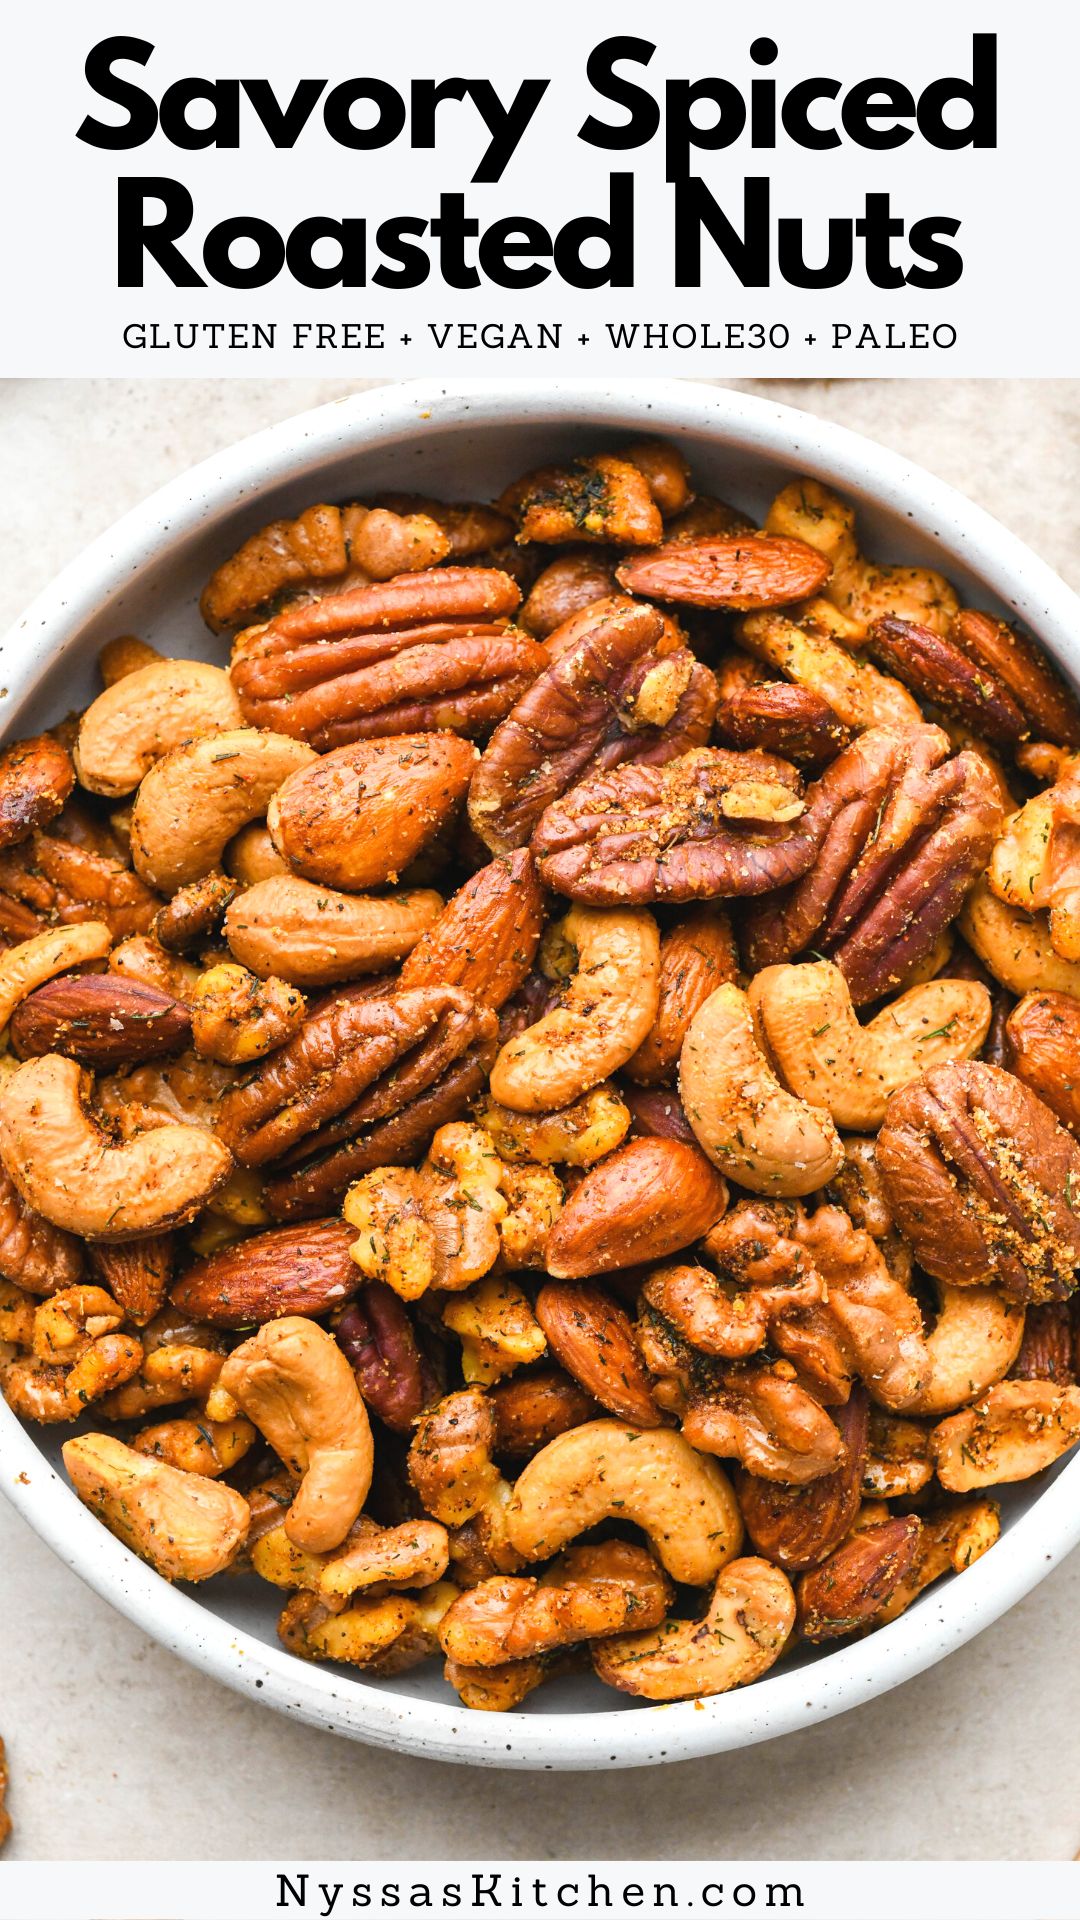 Spiced roasted nuts are the easy homemade recipe you need to tie any holiday or snack spread together. Perfect to serve for Thanksgiving, Christmas, with your favorite charcuterie spread, or as an every day snack. They are perfectly seasoned with a savory seasoning blend, only take minutes to prep and less than half and hour to roast. Made with walnuts, pecans, almonds, and cashews, but easily customizable based on your preferences. Whole30, paleo, gluten free, sugar free, and vegan (no egg whites).